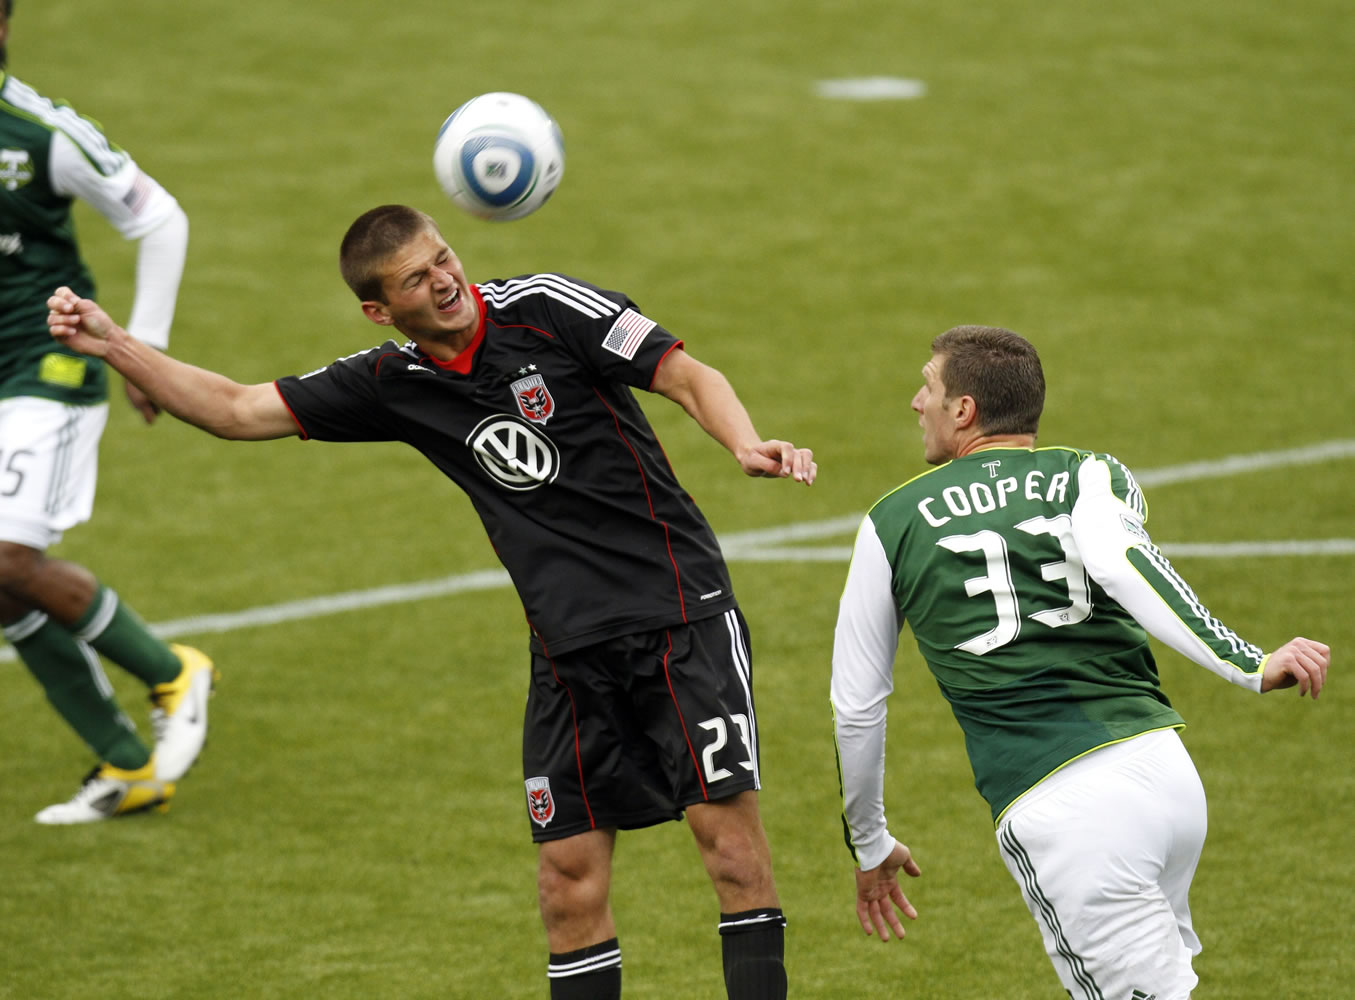 Timbers Reserves fall to Chivas USA Reserves